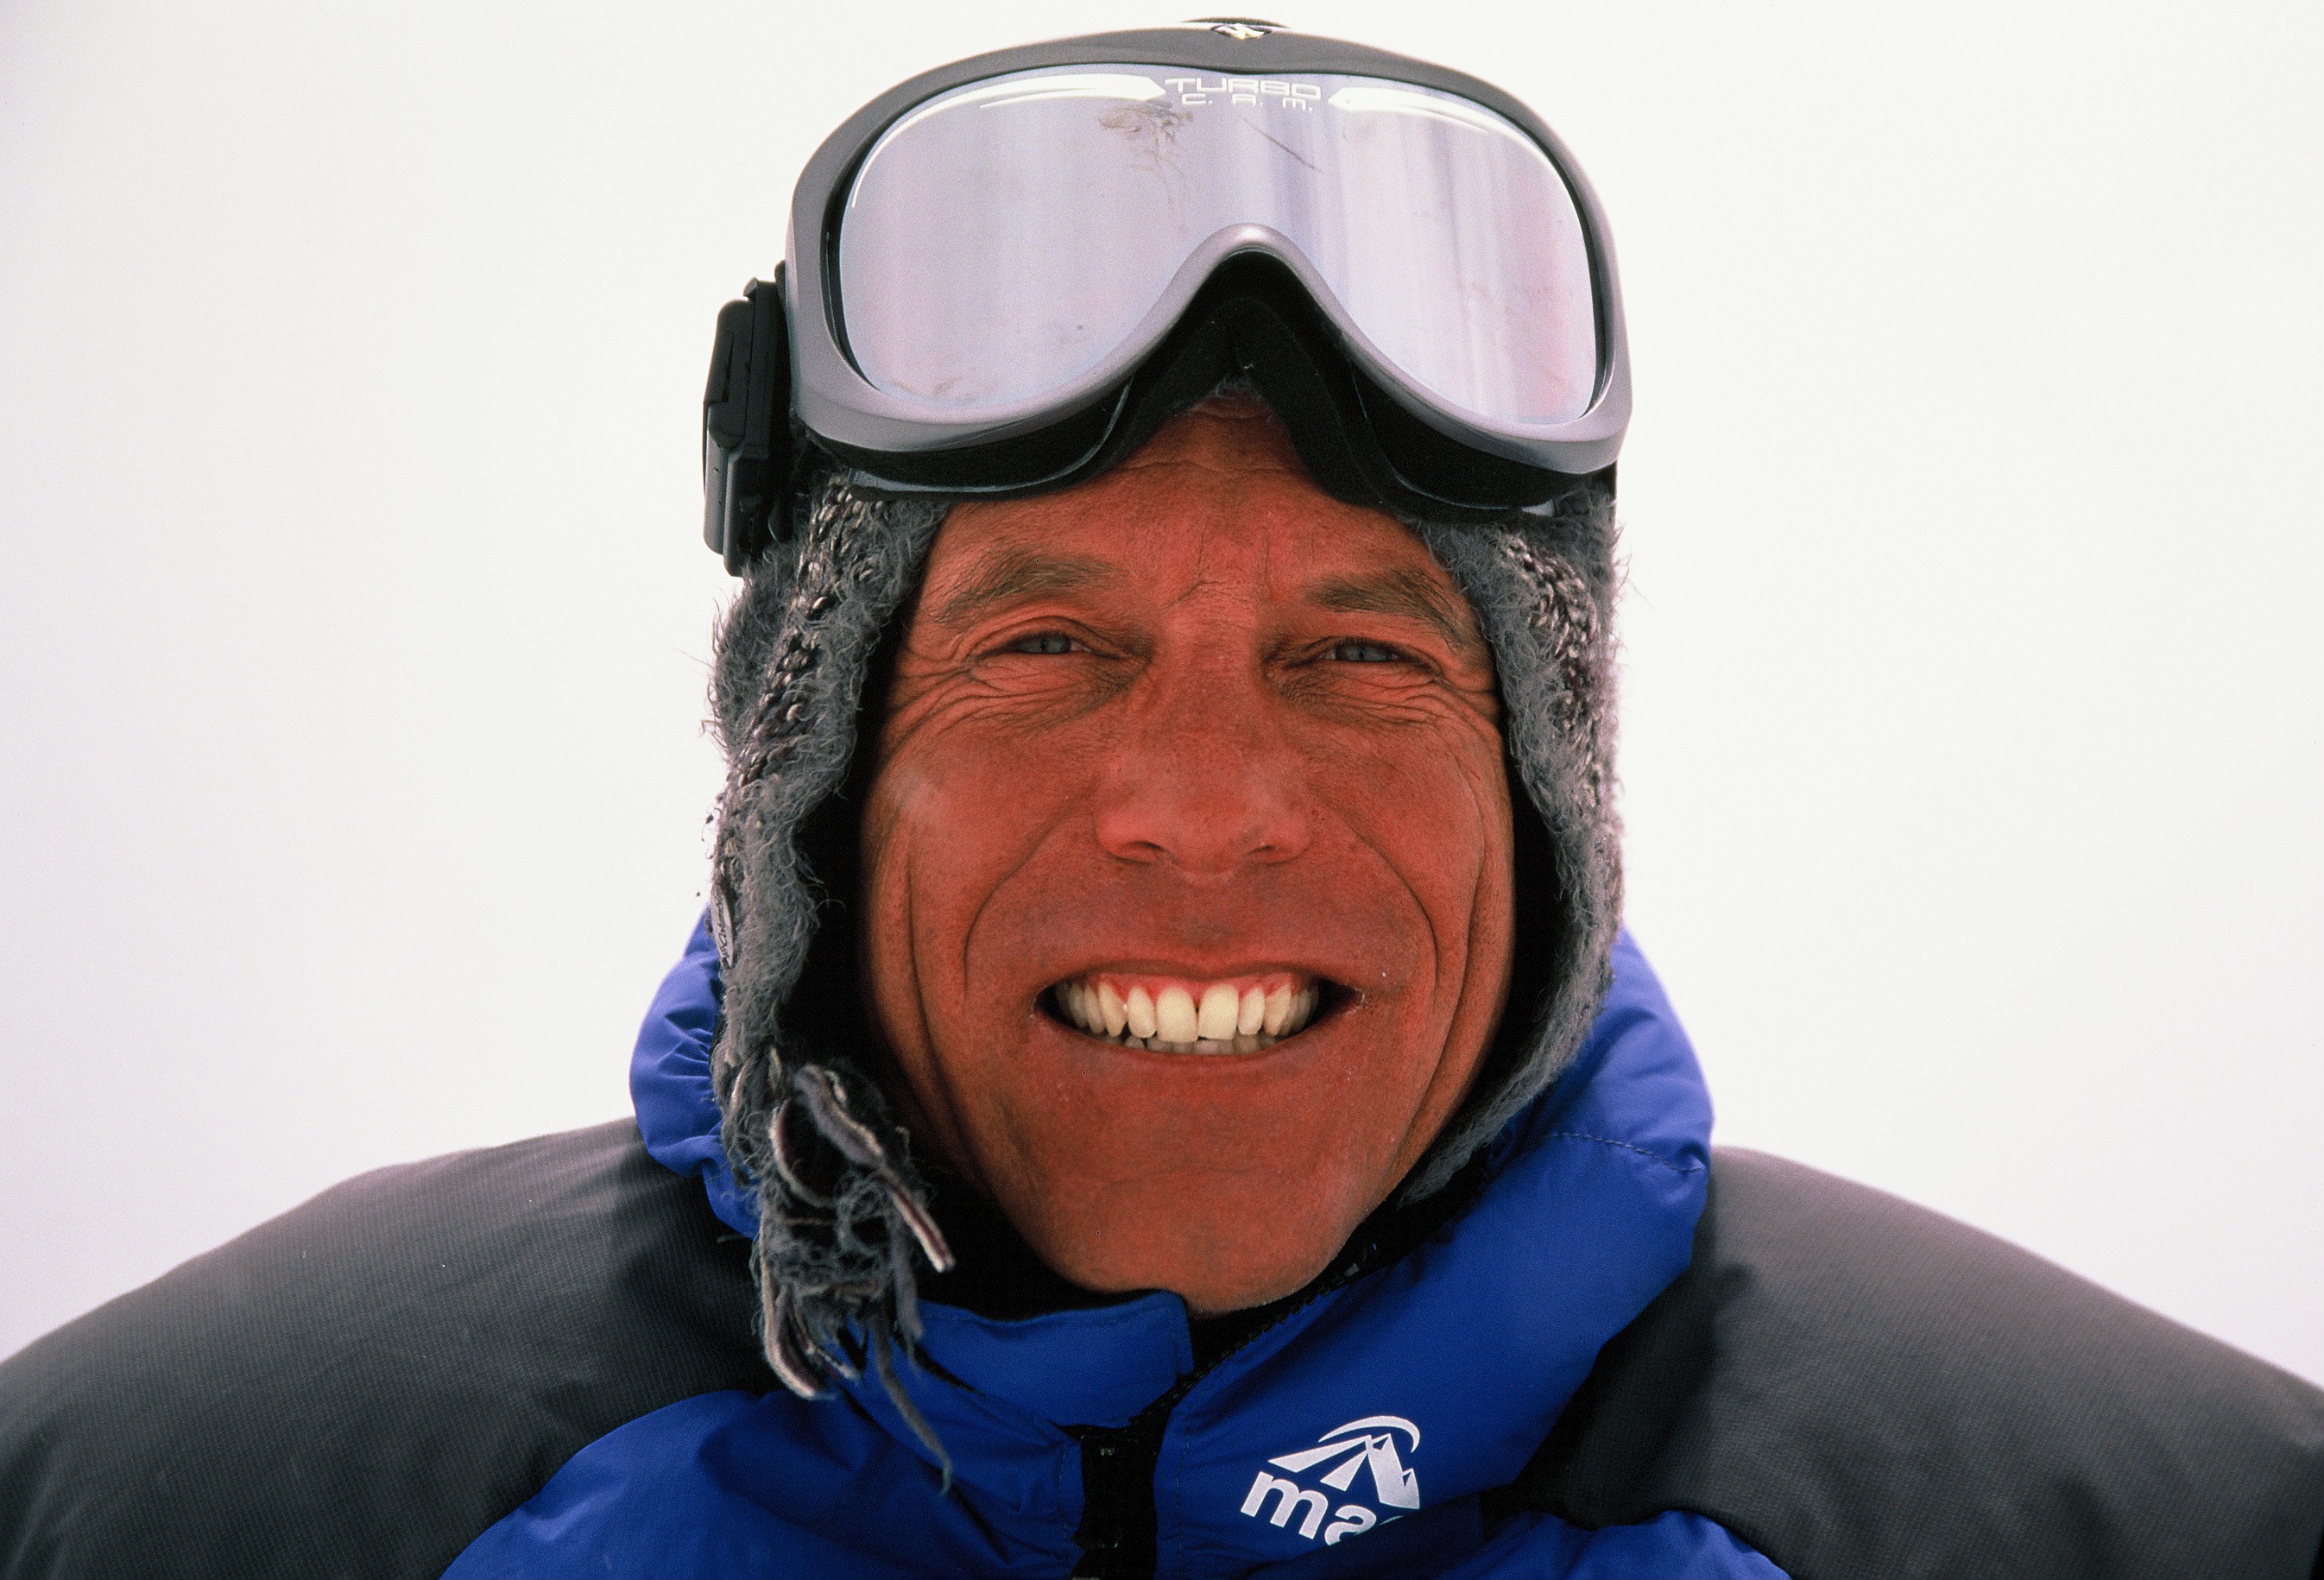 Guy Cotter. Mountain guide, Everest specialist, film locations and safety manager.